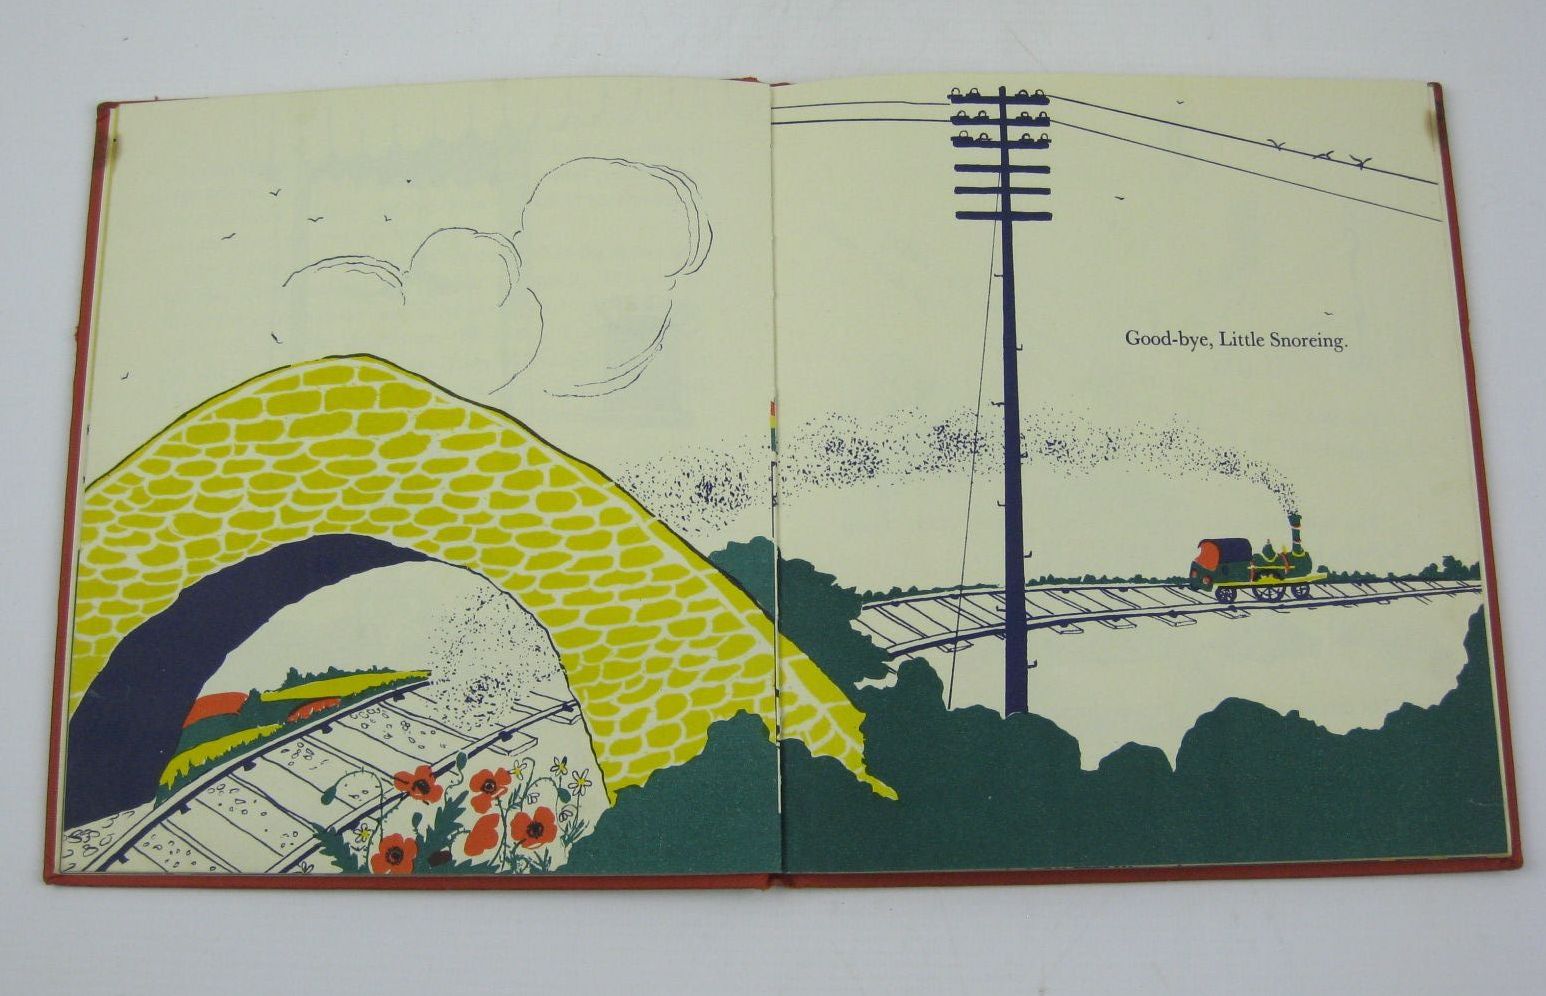 Photo of THE LITTLE TRAIN written by Greene, Graham illustrated by Craigie, Dorothy published by Max Parrish (STOCK CODE: 1316398)  for sale by Stella & Rose's Books